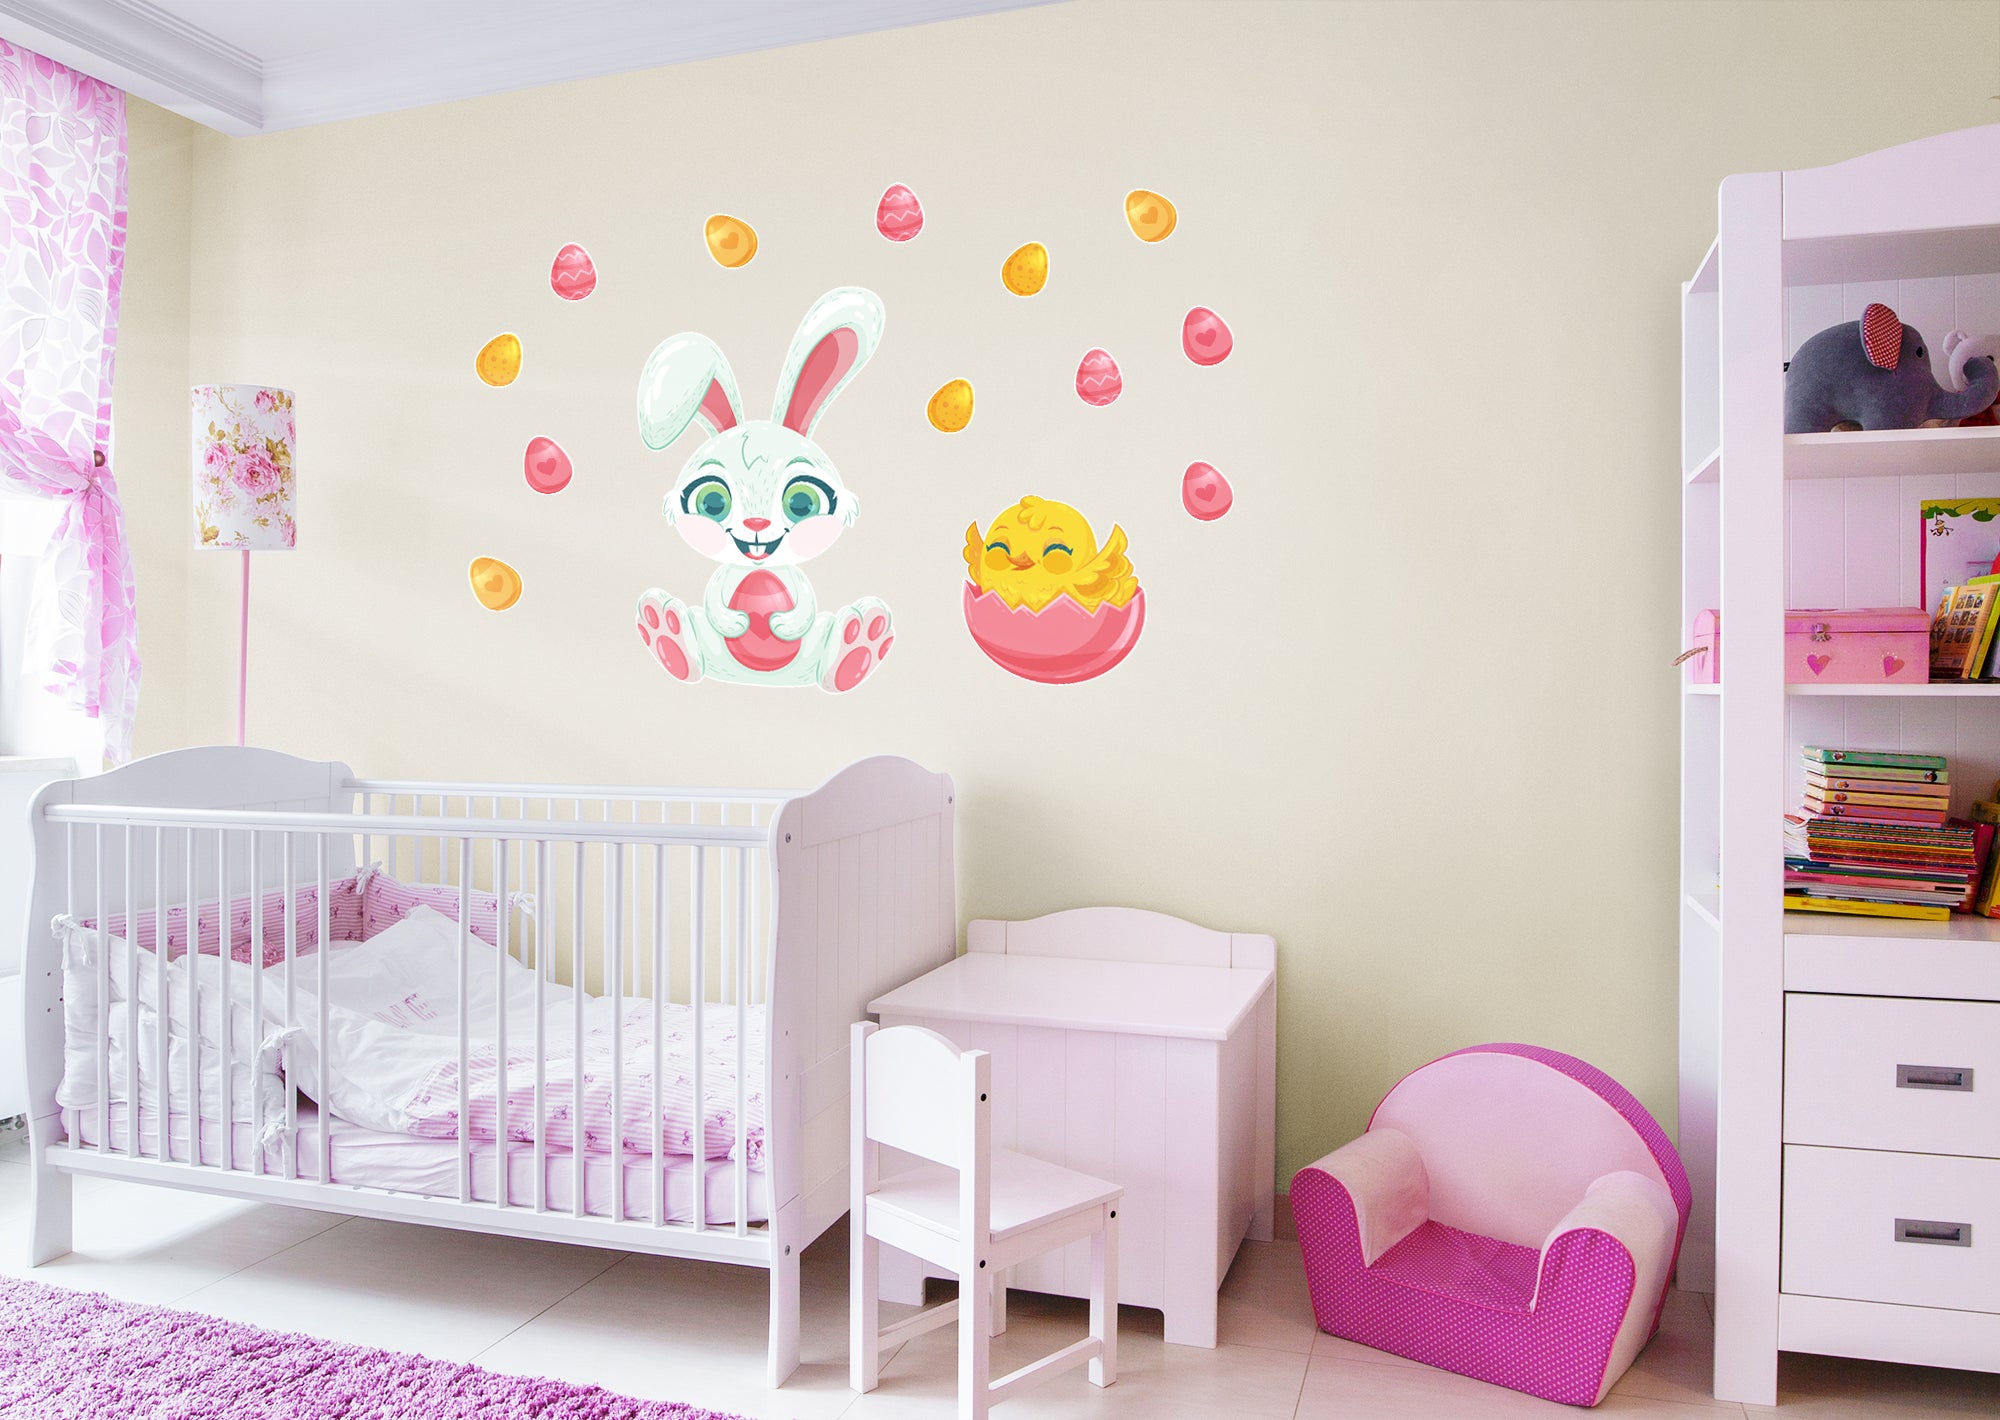 Easter Bunny & Chick - Removable Wall Decal Giant Icon + 13 Decals by Fathead | Vinyl